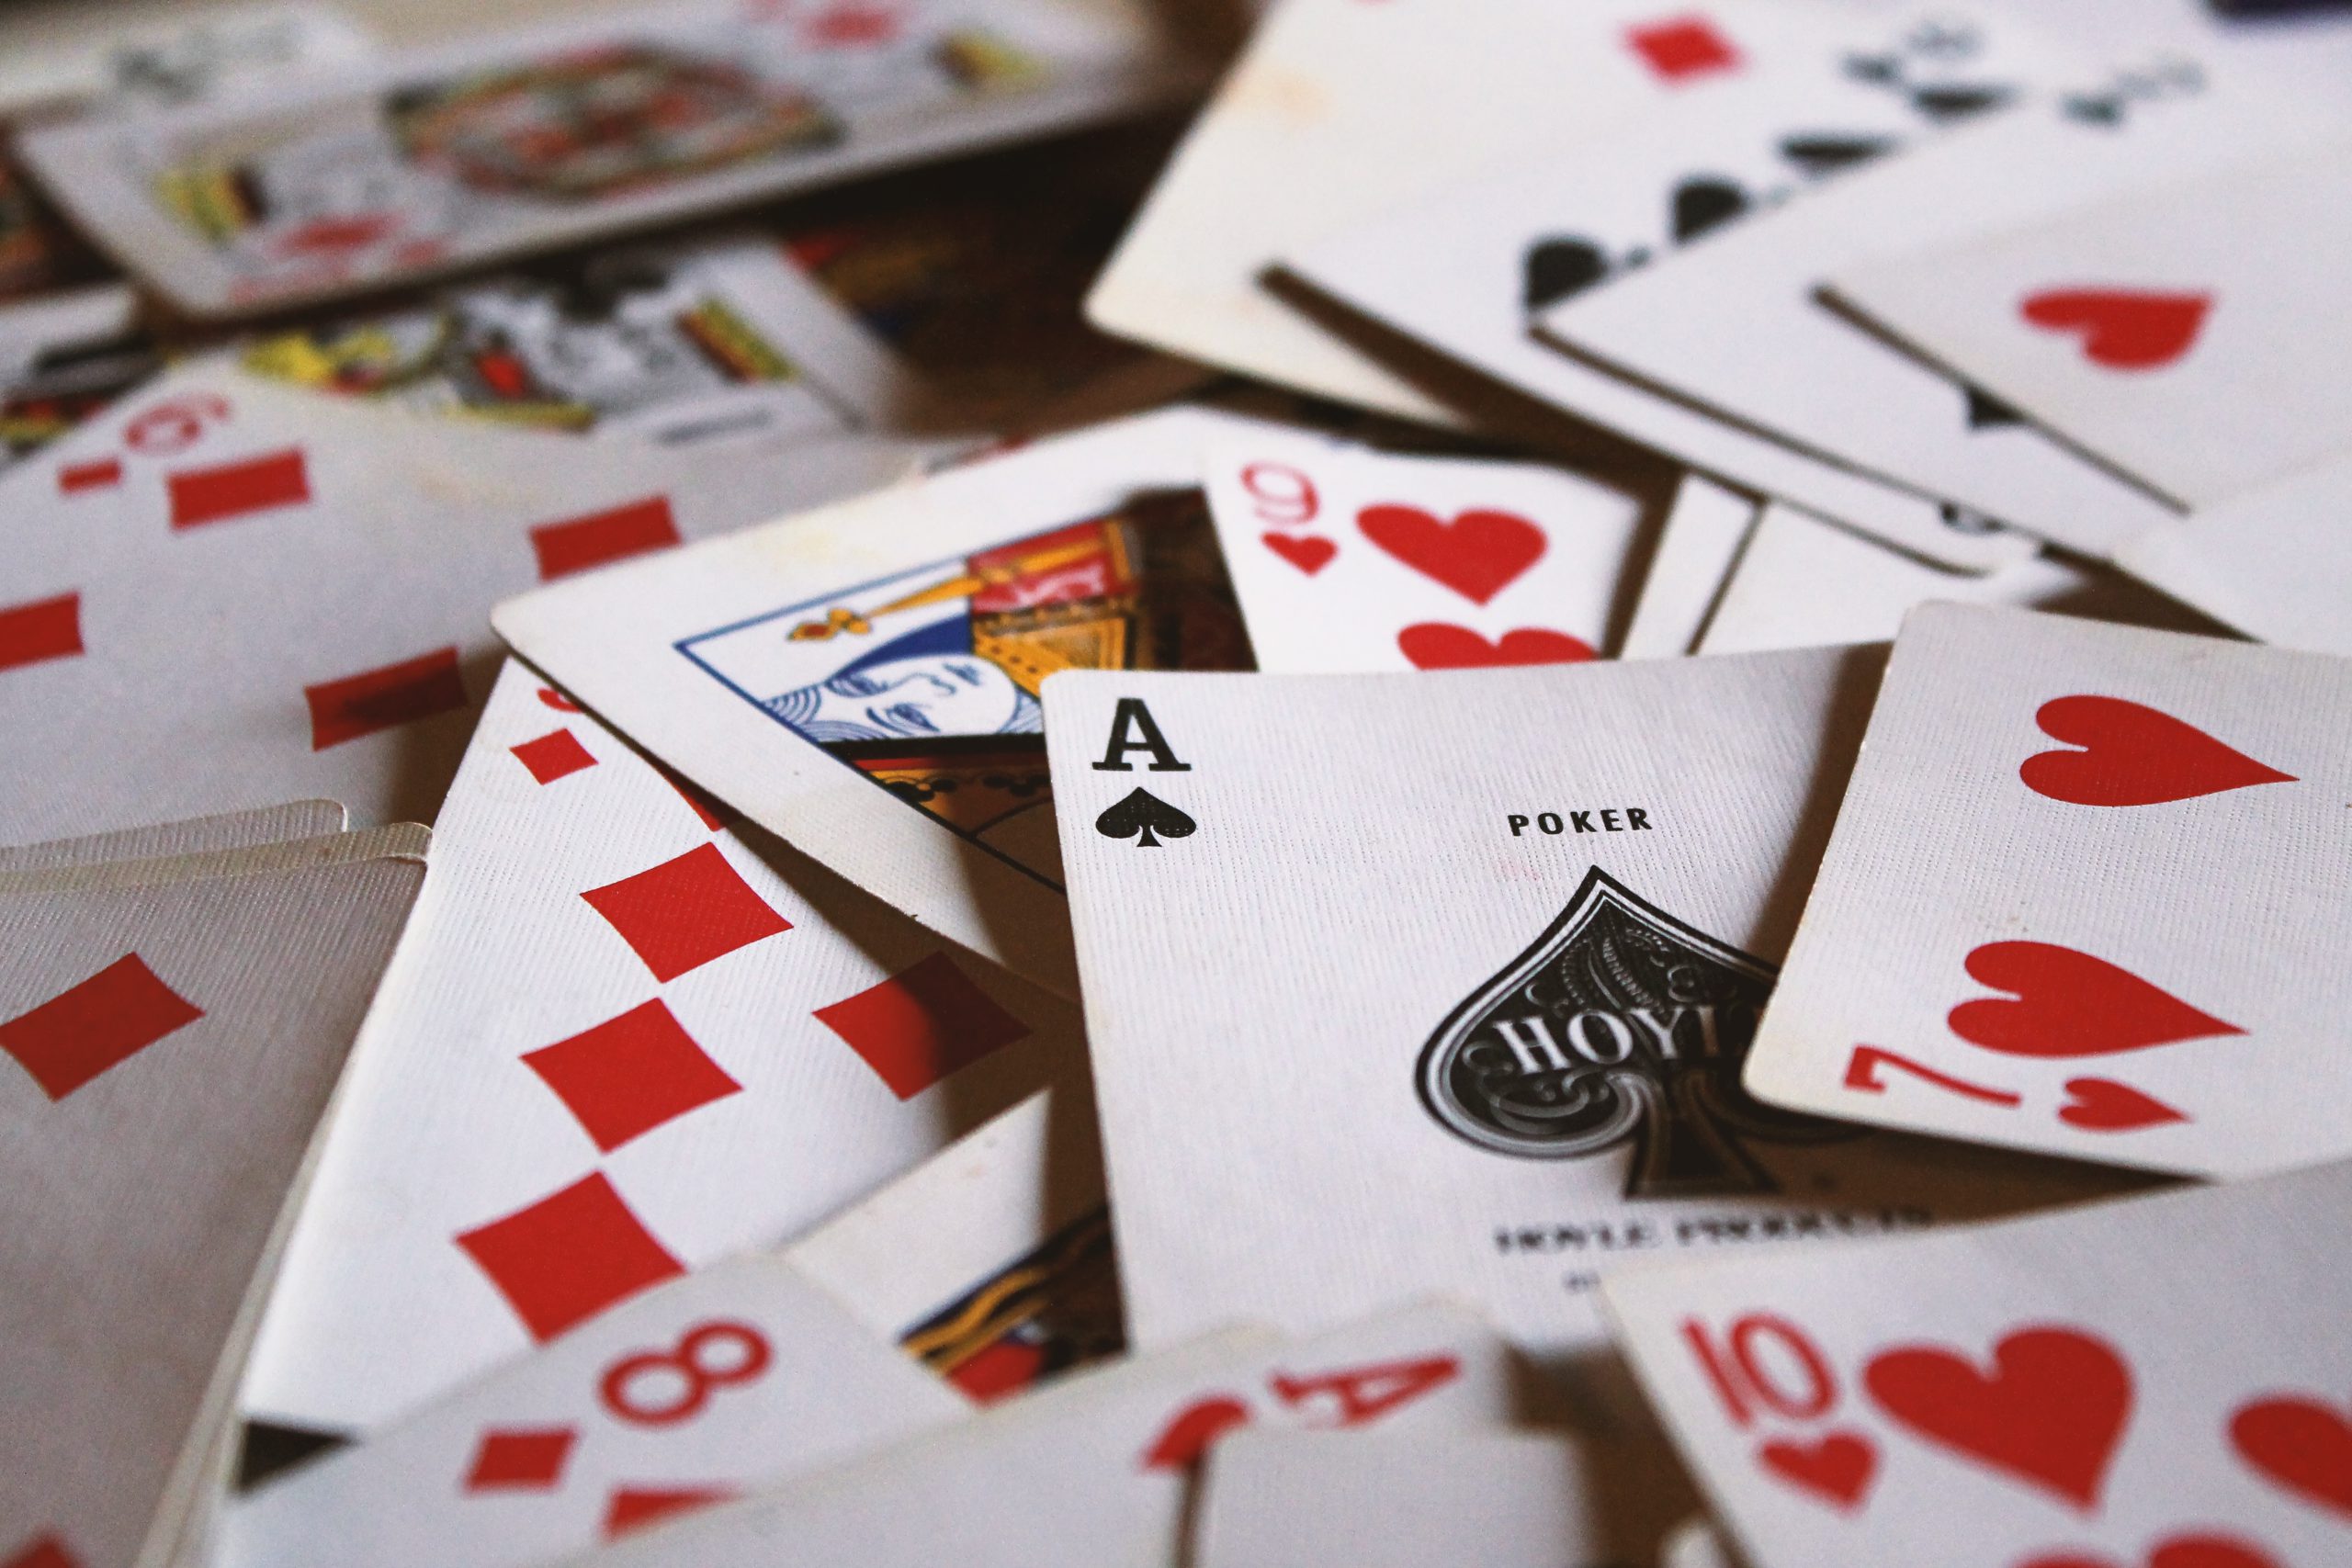 What are overcards in the game of poker?